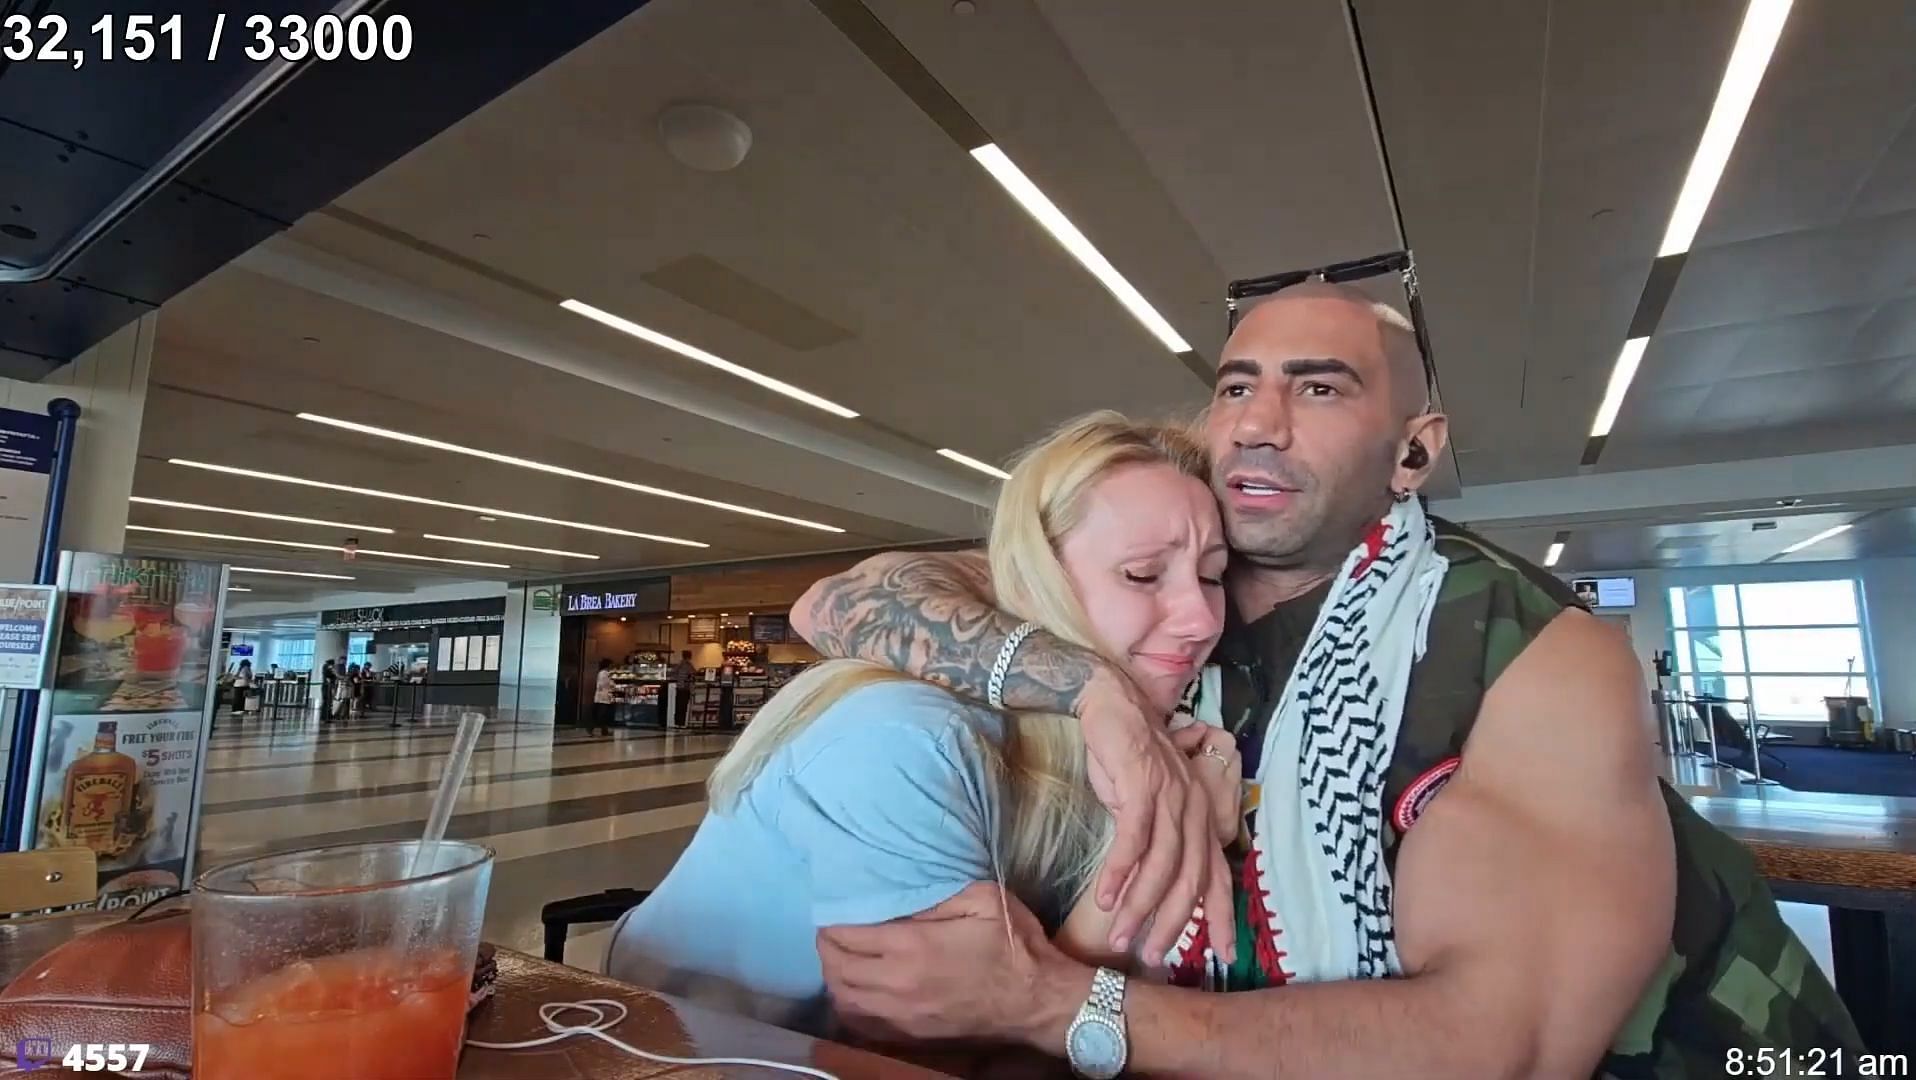 Fousey breaks down after being accused of taking advantage of drunk woman in an airport (Image via Fousey/Twitch)